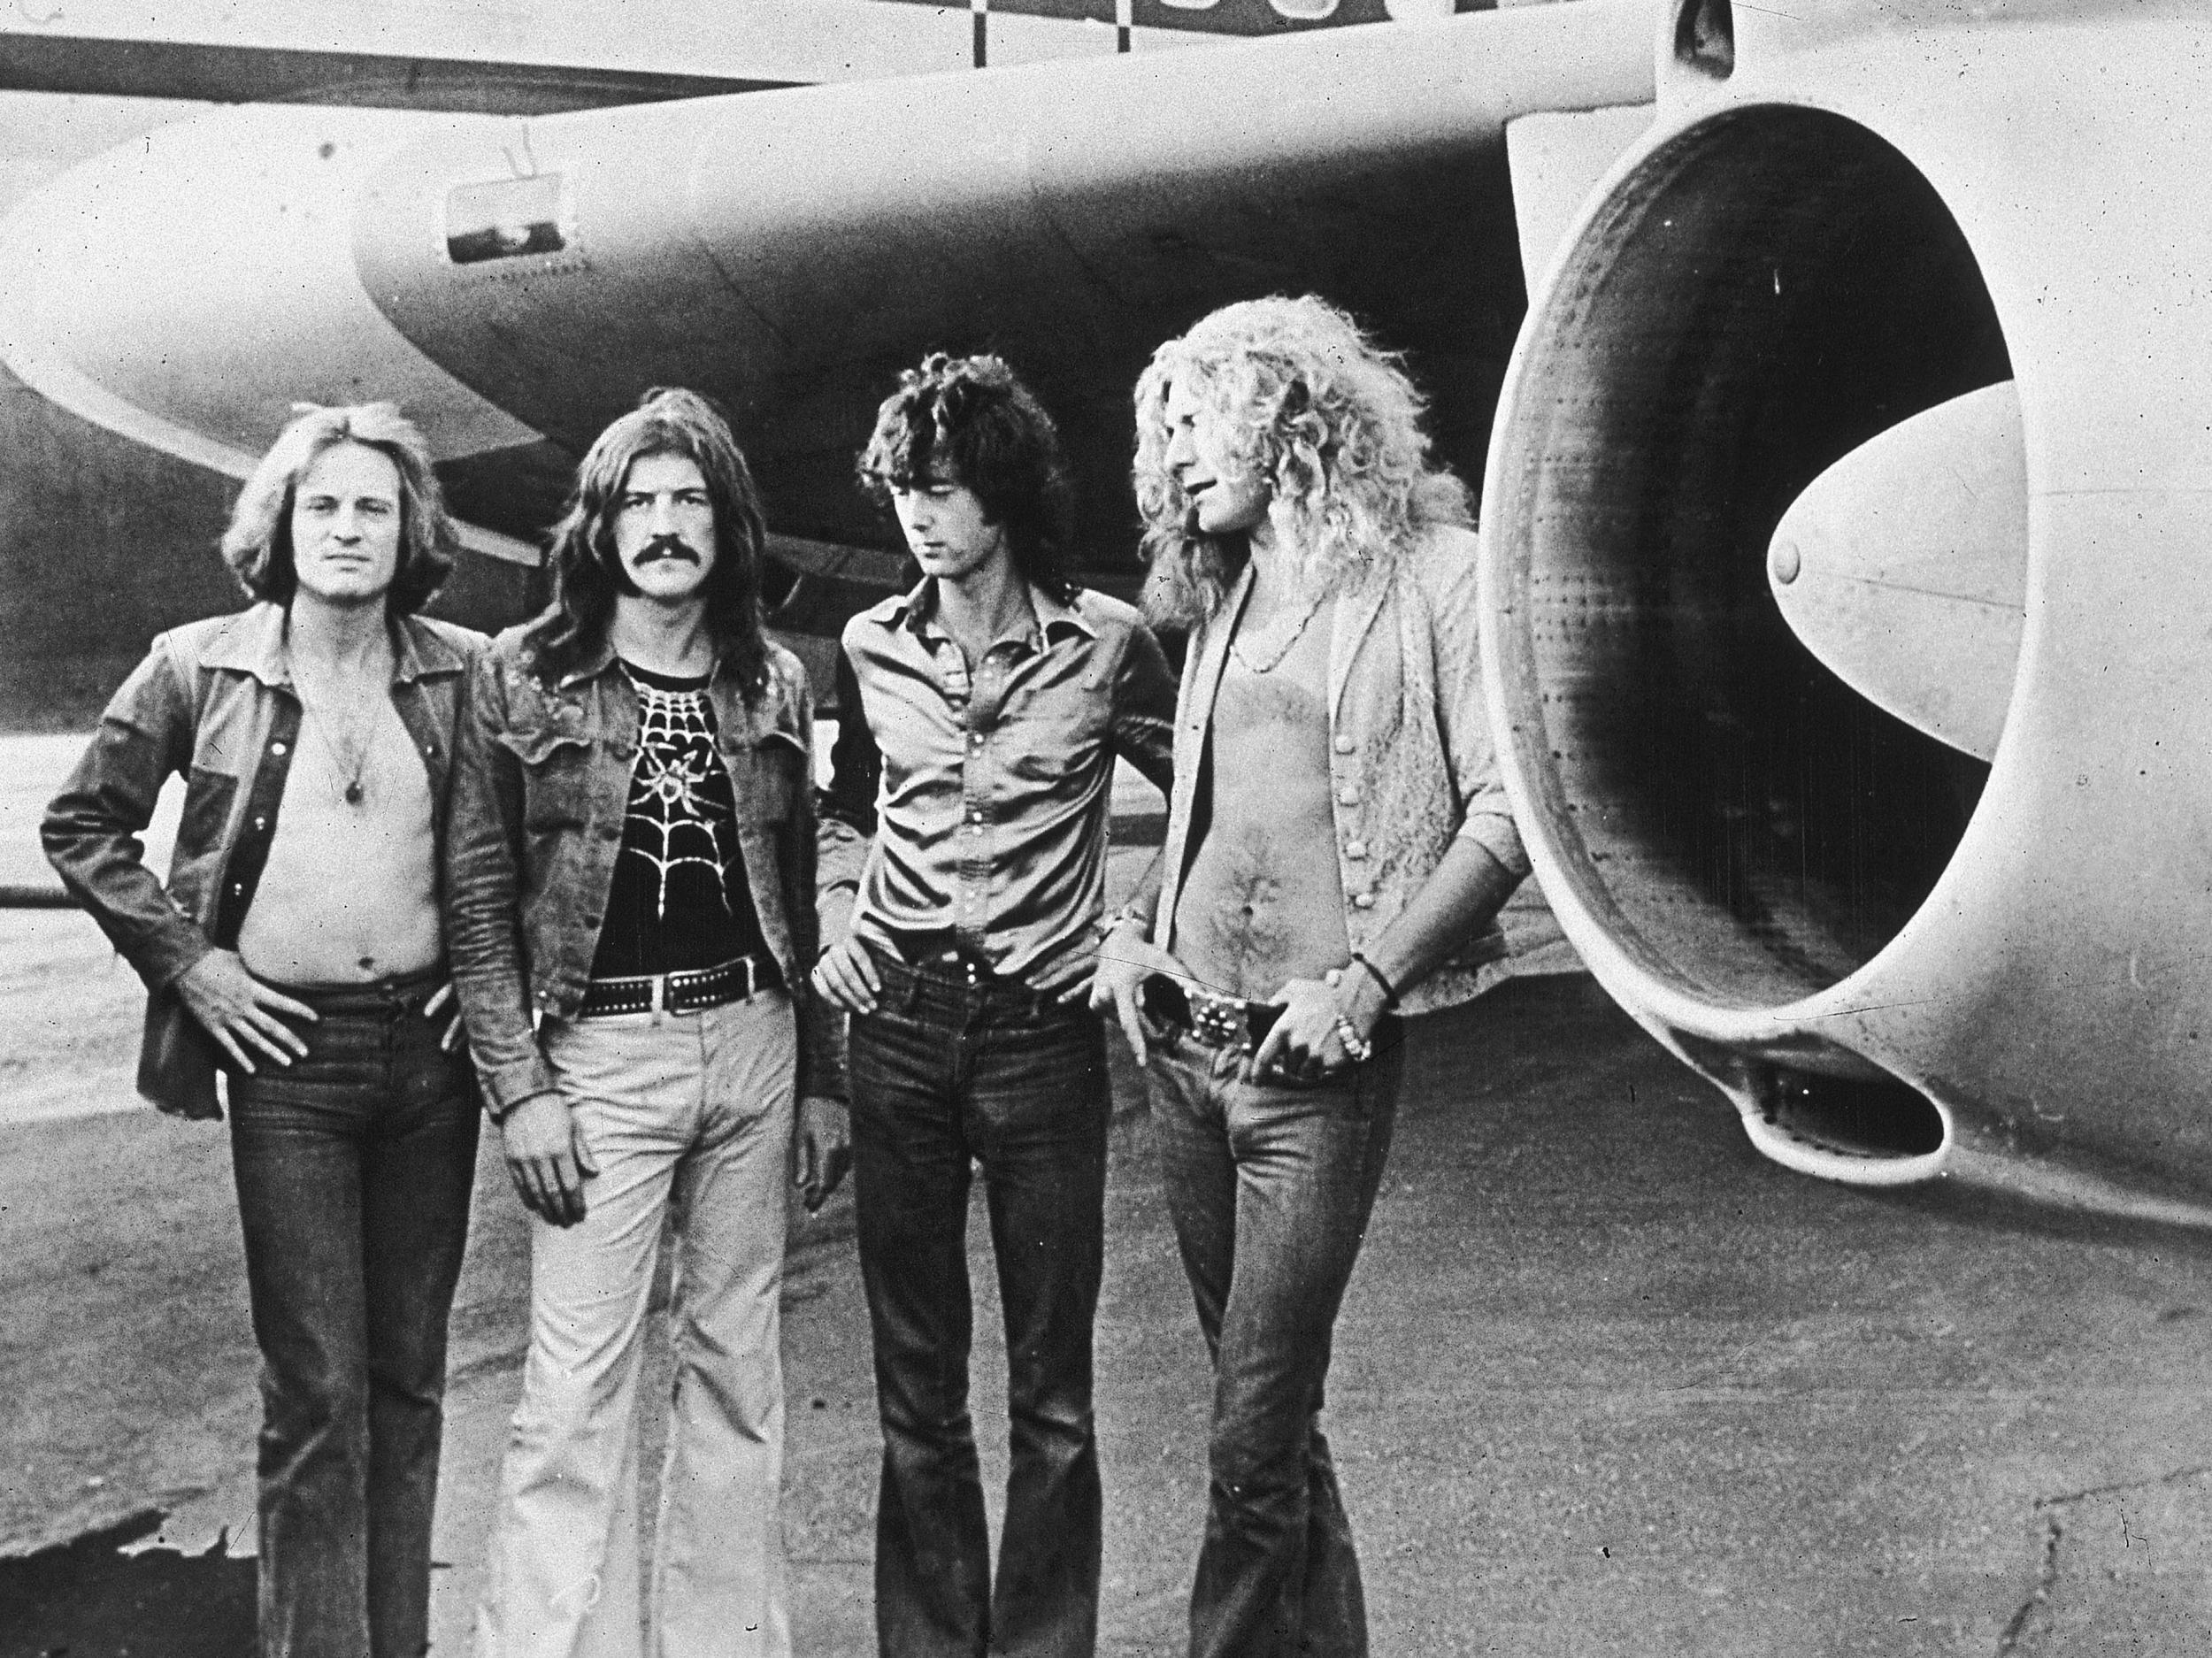 Led Zeppelin toyed with ‘tune’, ‘ditty’, ‘track’, ‘melody’ and ‘number’ before deciding it would be the ‘song’ that wouldn’t change on their 1976 live album